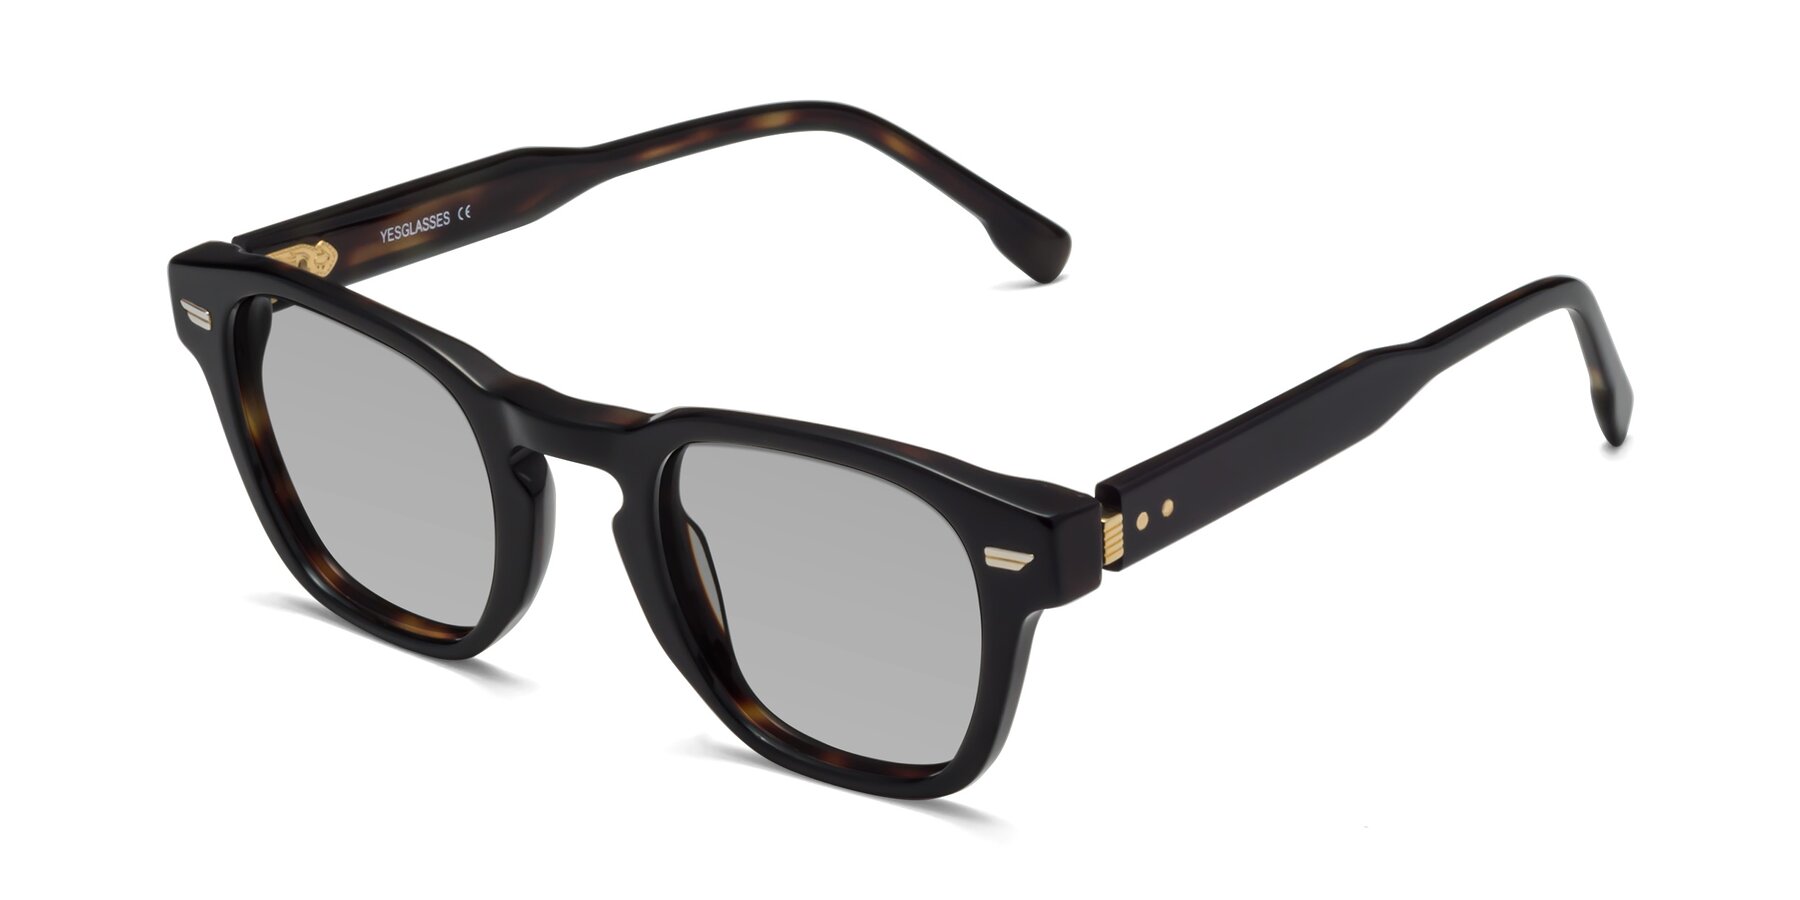 Angle of 1421 in Black-Tortoise with Light Gray Tinted Lenses